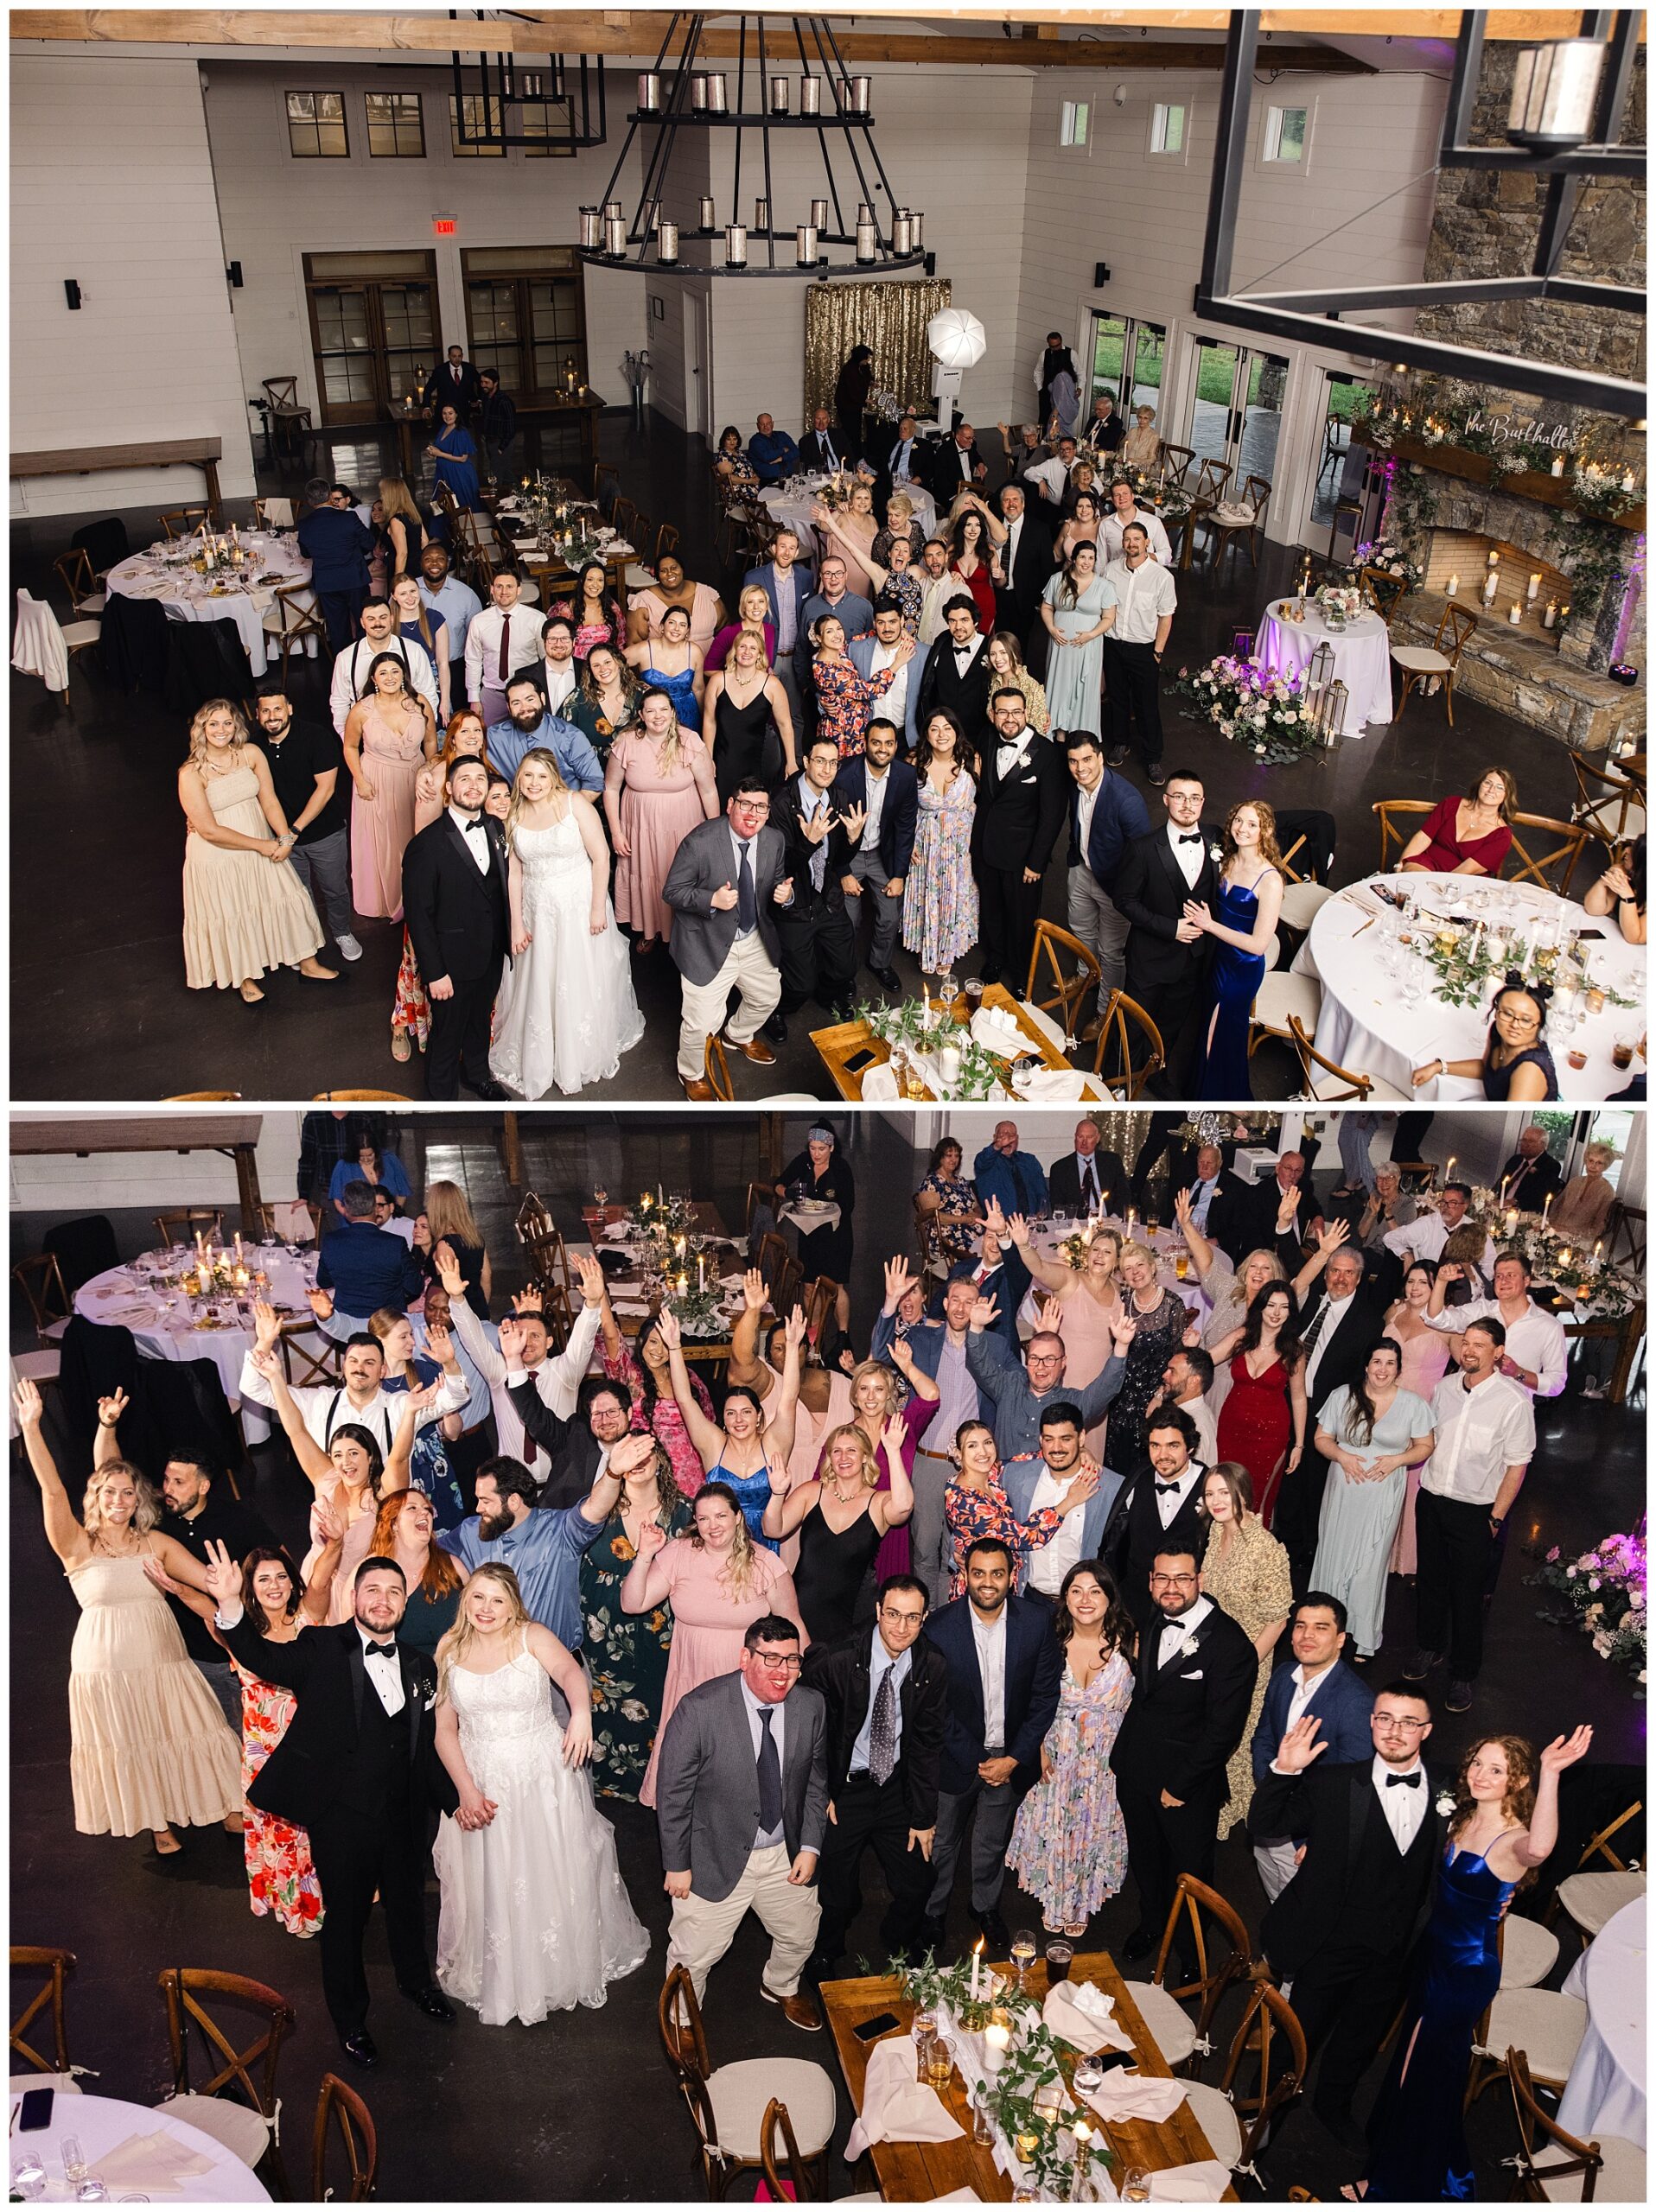 A mountain wedding reception scene at Chestnut Ridge with guests gathered around the bride and groom, smiling and waving at the camera in a festively decorated hall.